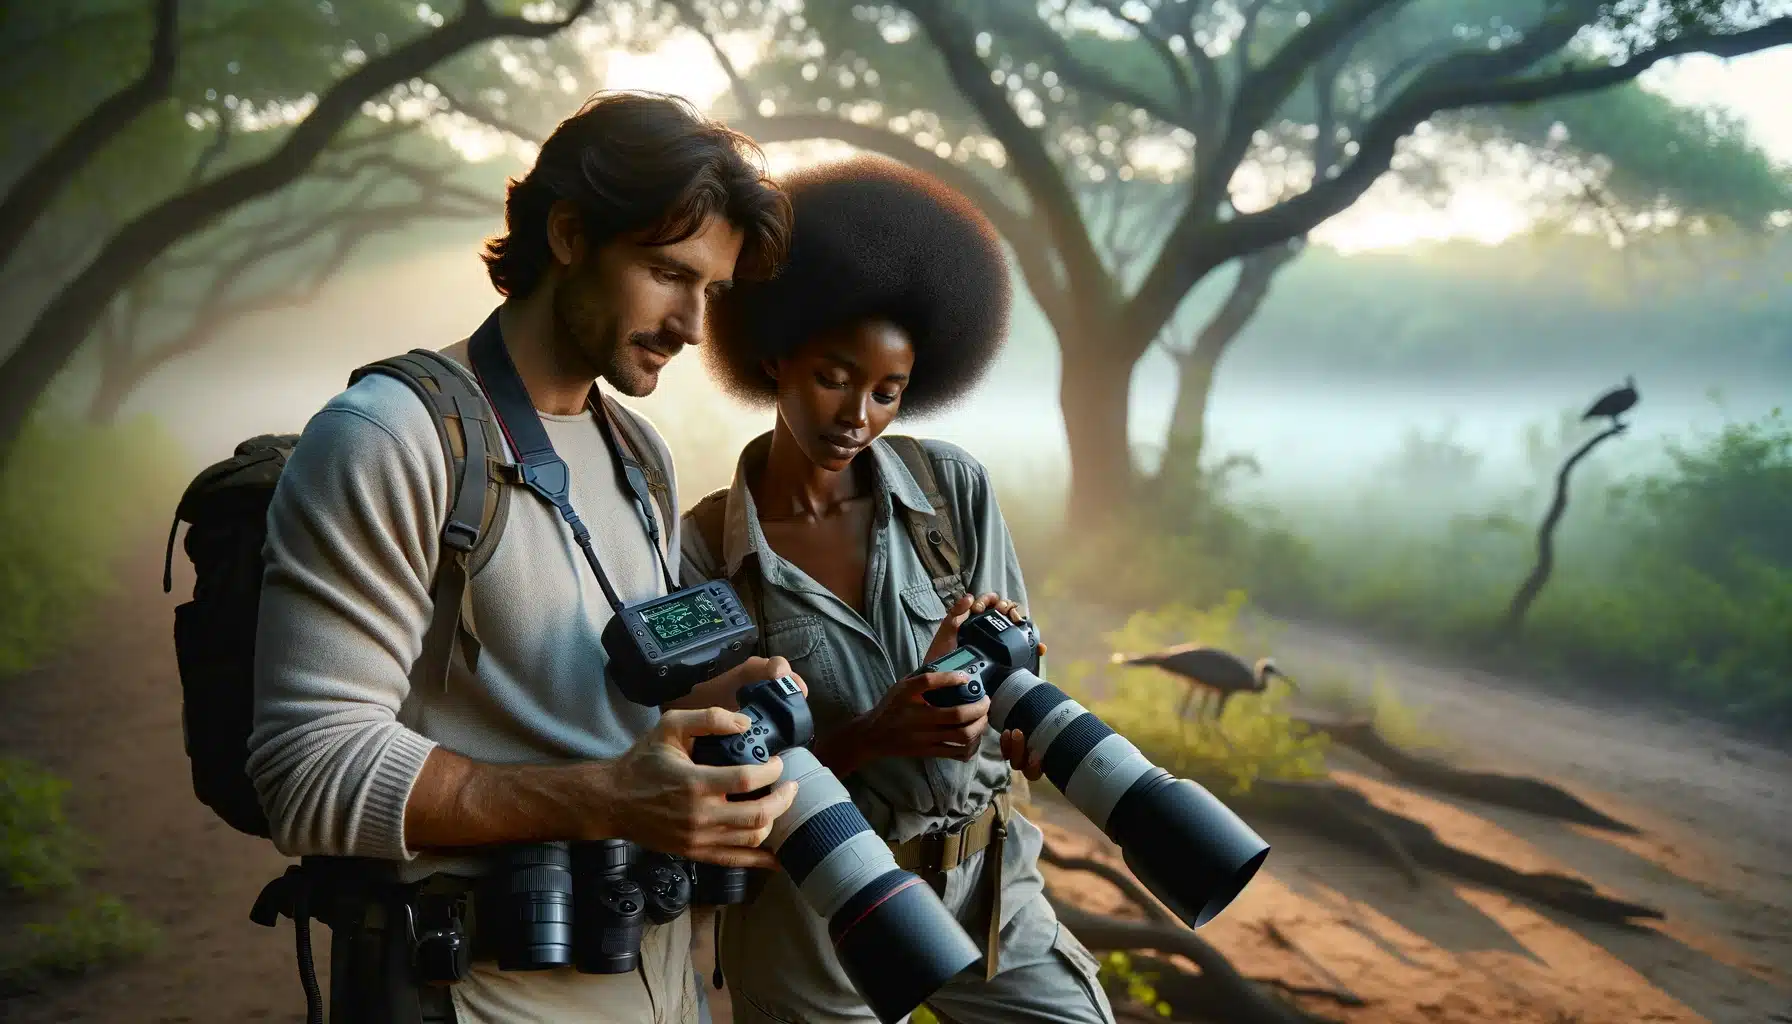 Two wildlife photographers, a Caucasian male and an African female, adjust their camera settings in a serene forest at dawn, equipped with telephoto lenses and other photography tools, showcasing their expertise in wildlife photography.